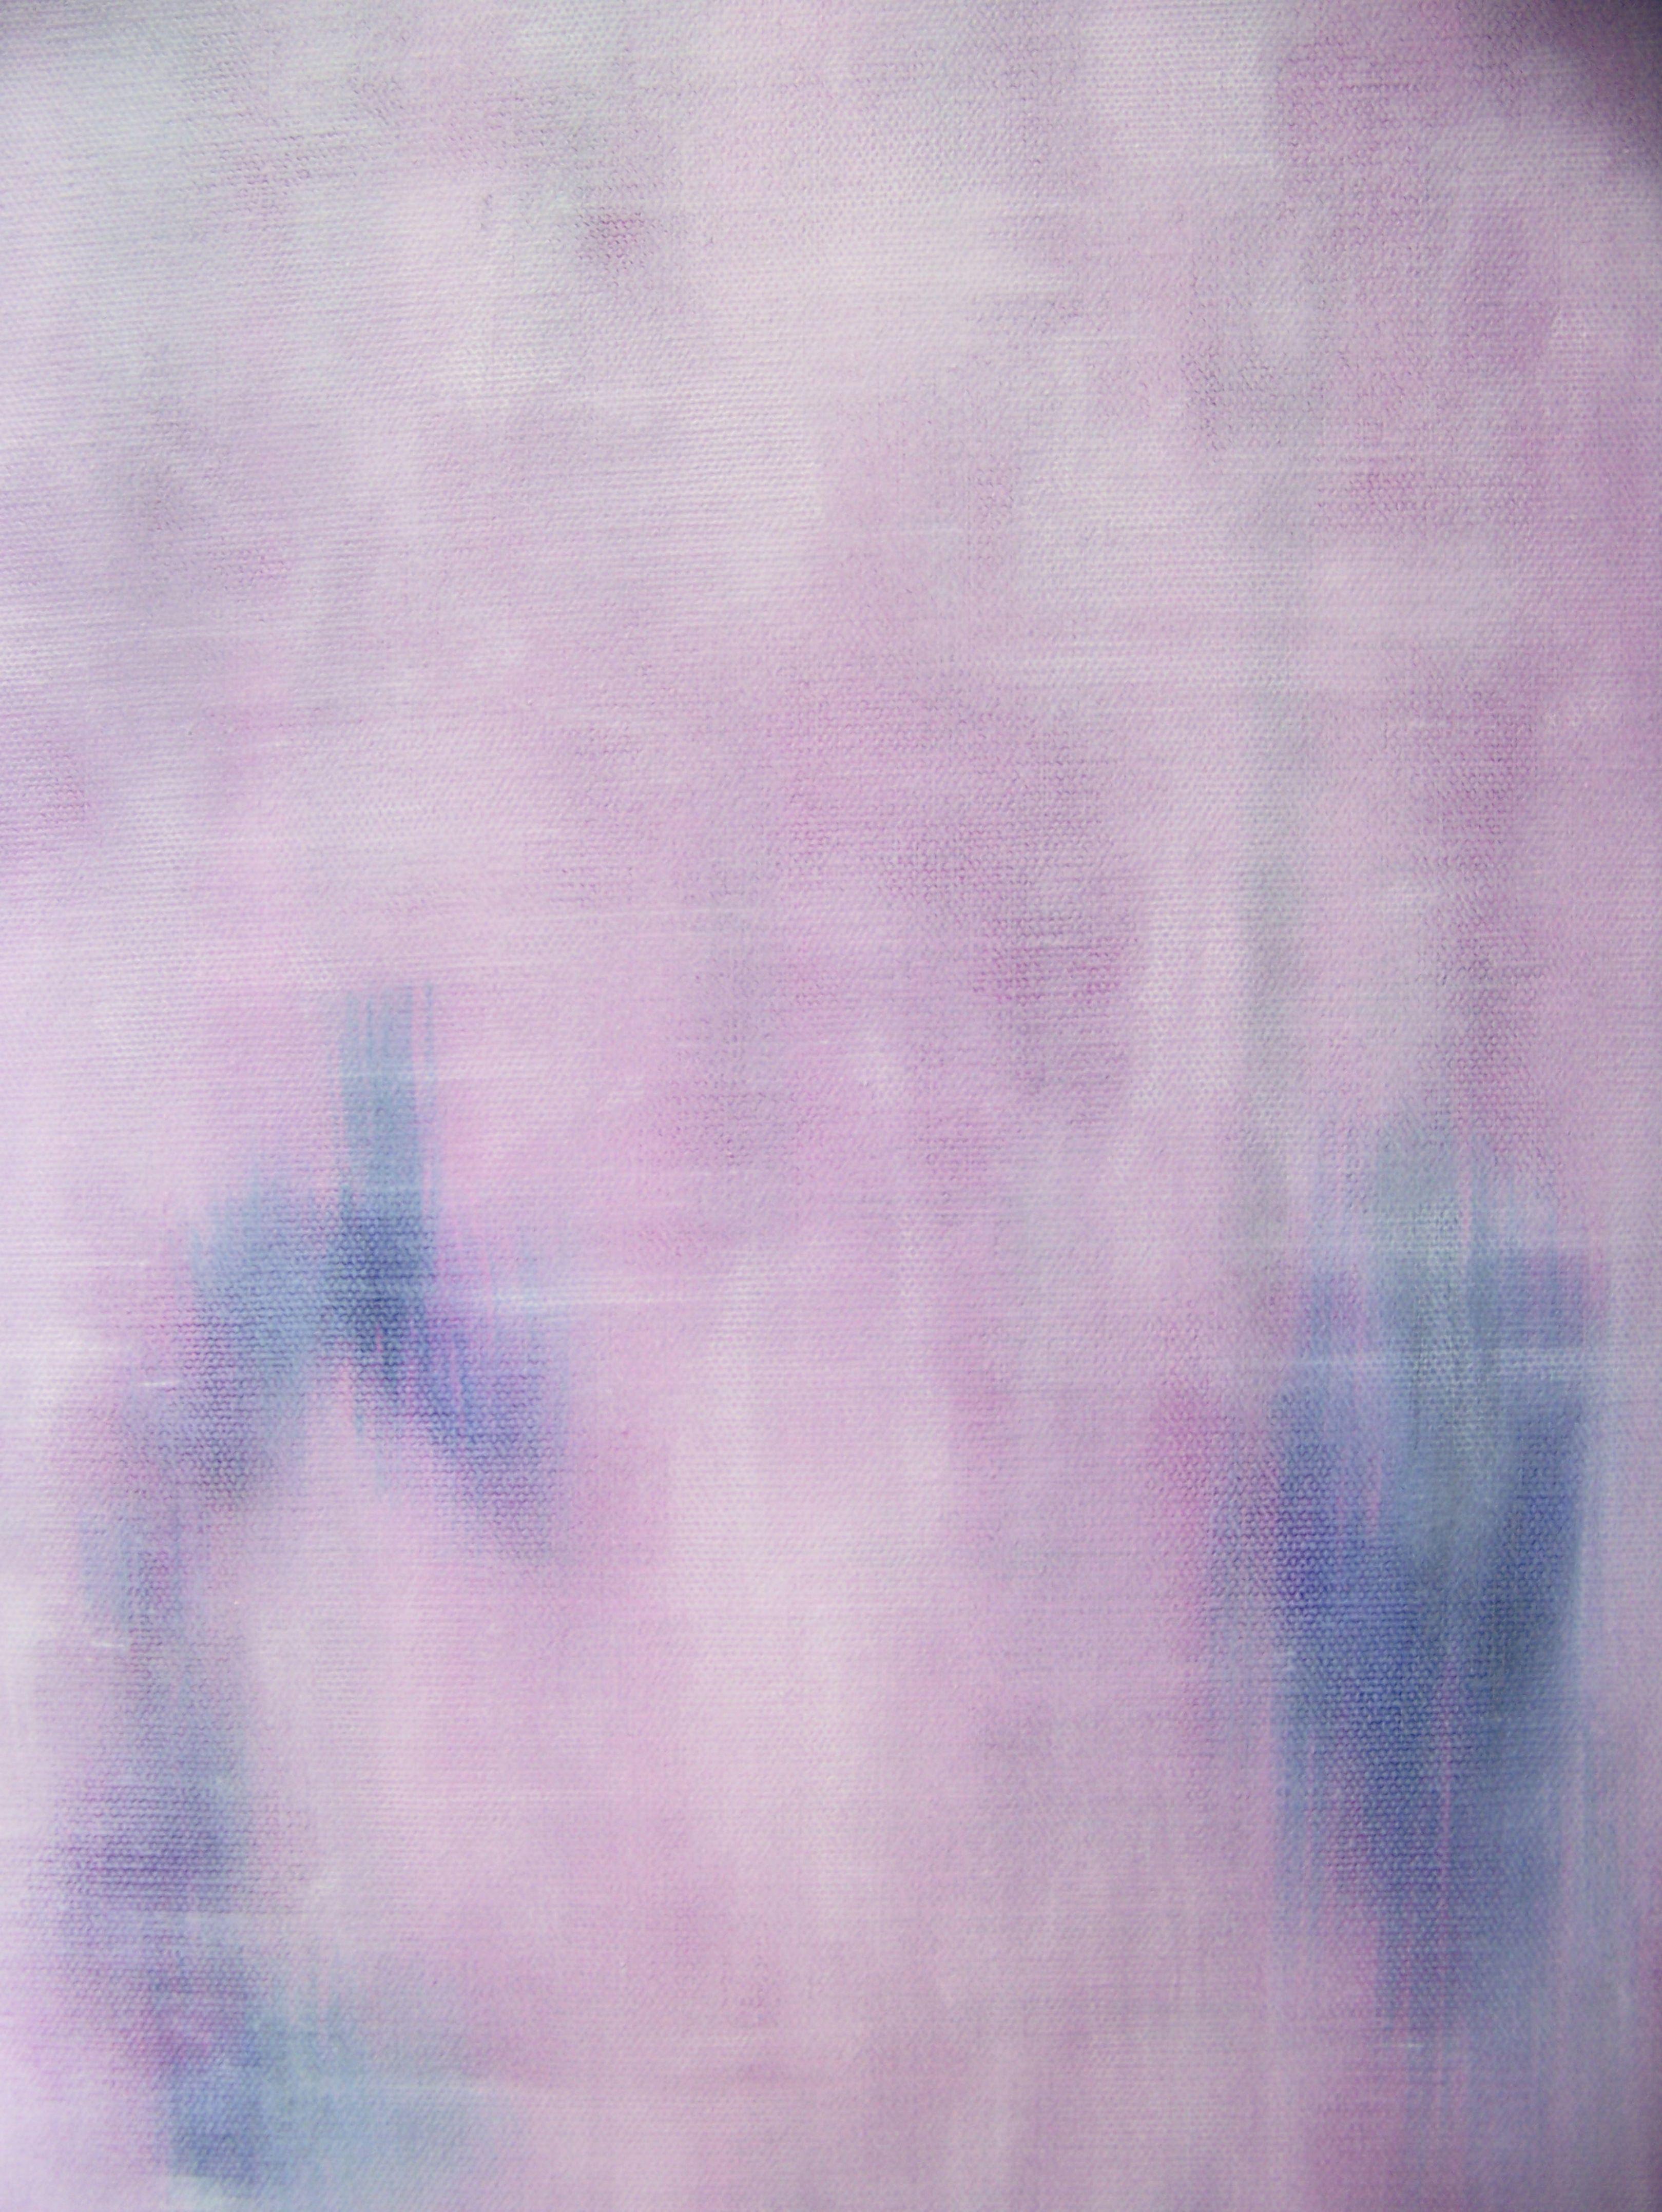 Lavender Ice, Painting, Oil on Canvas 2